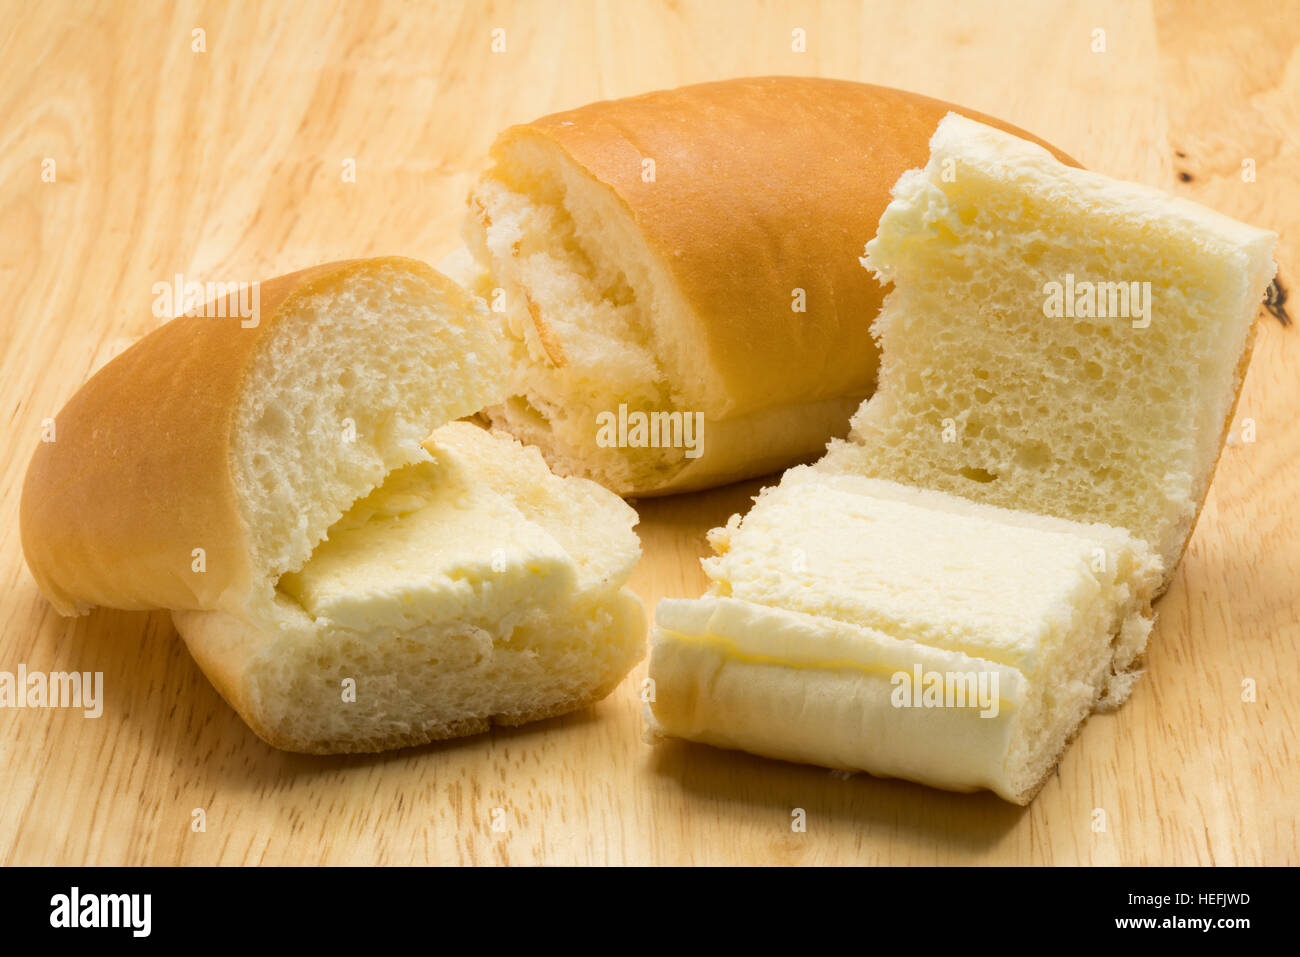 Hotdog bread filled with sweetened butter cream on a wooden board Stock Photo